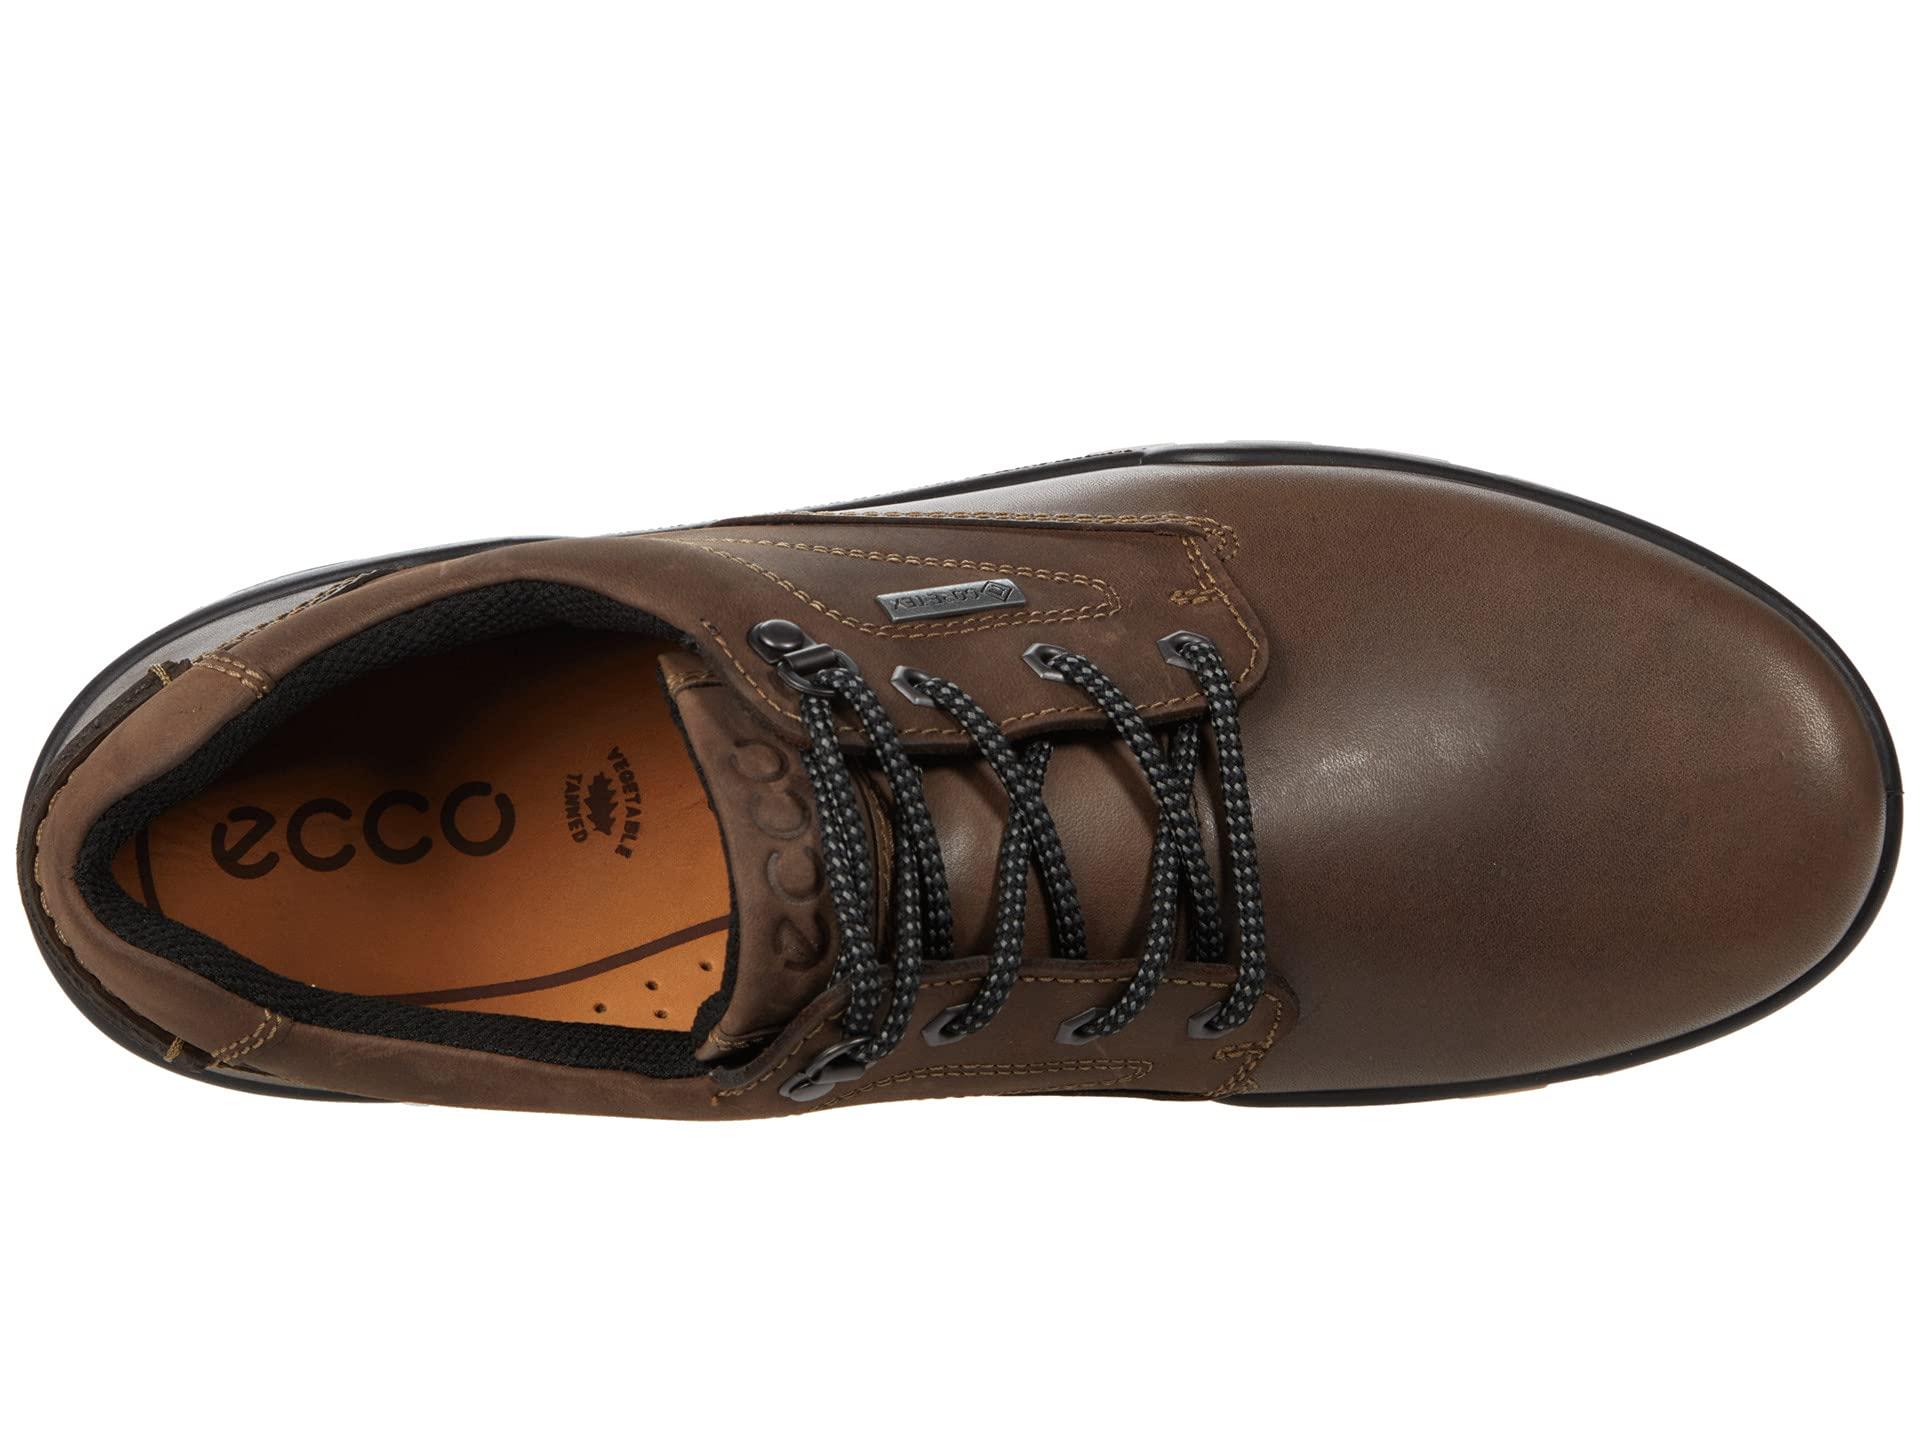 Ecco Track 25 Low Plain Toe Gore-tex in for | Lyst